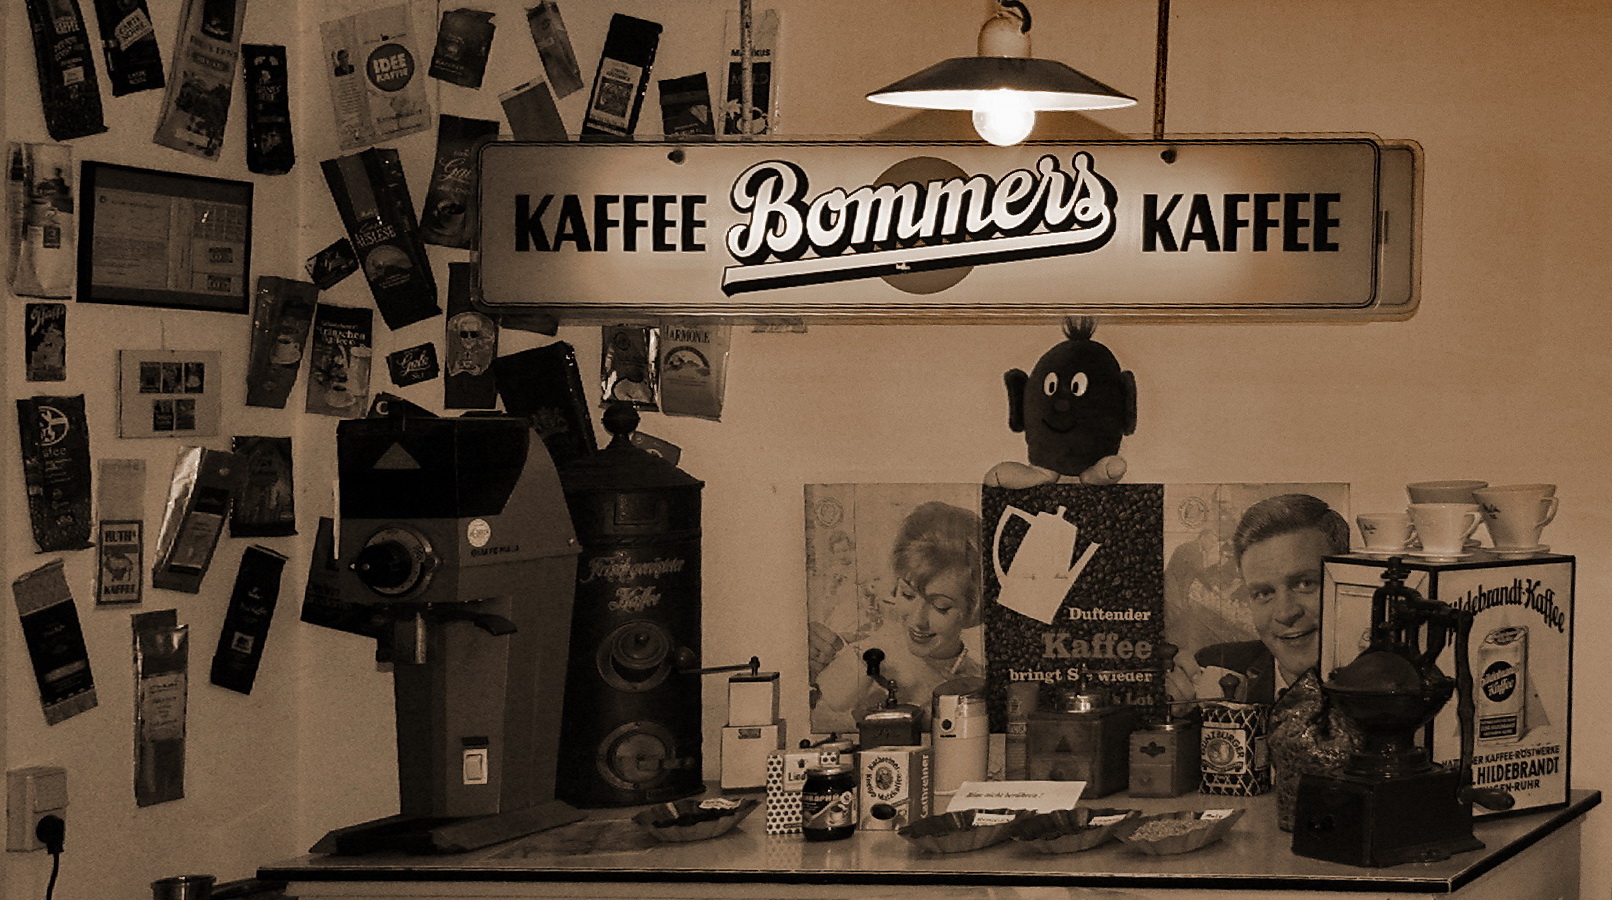 Bommers Kaffee